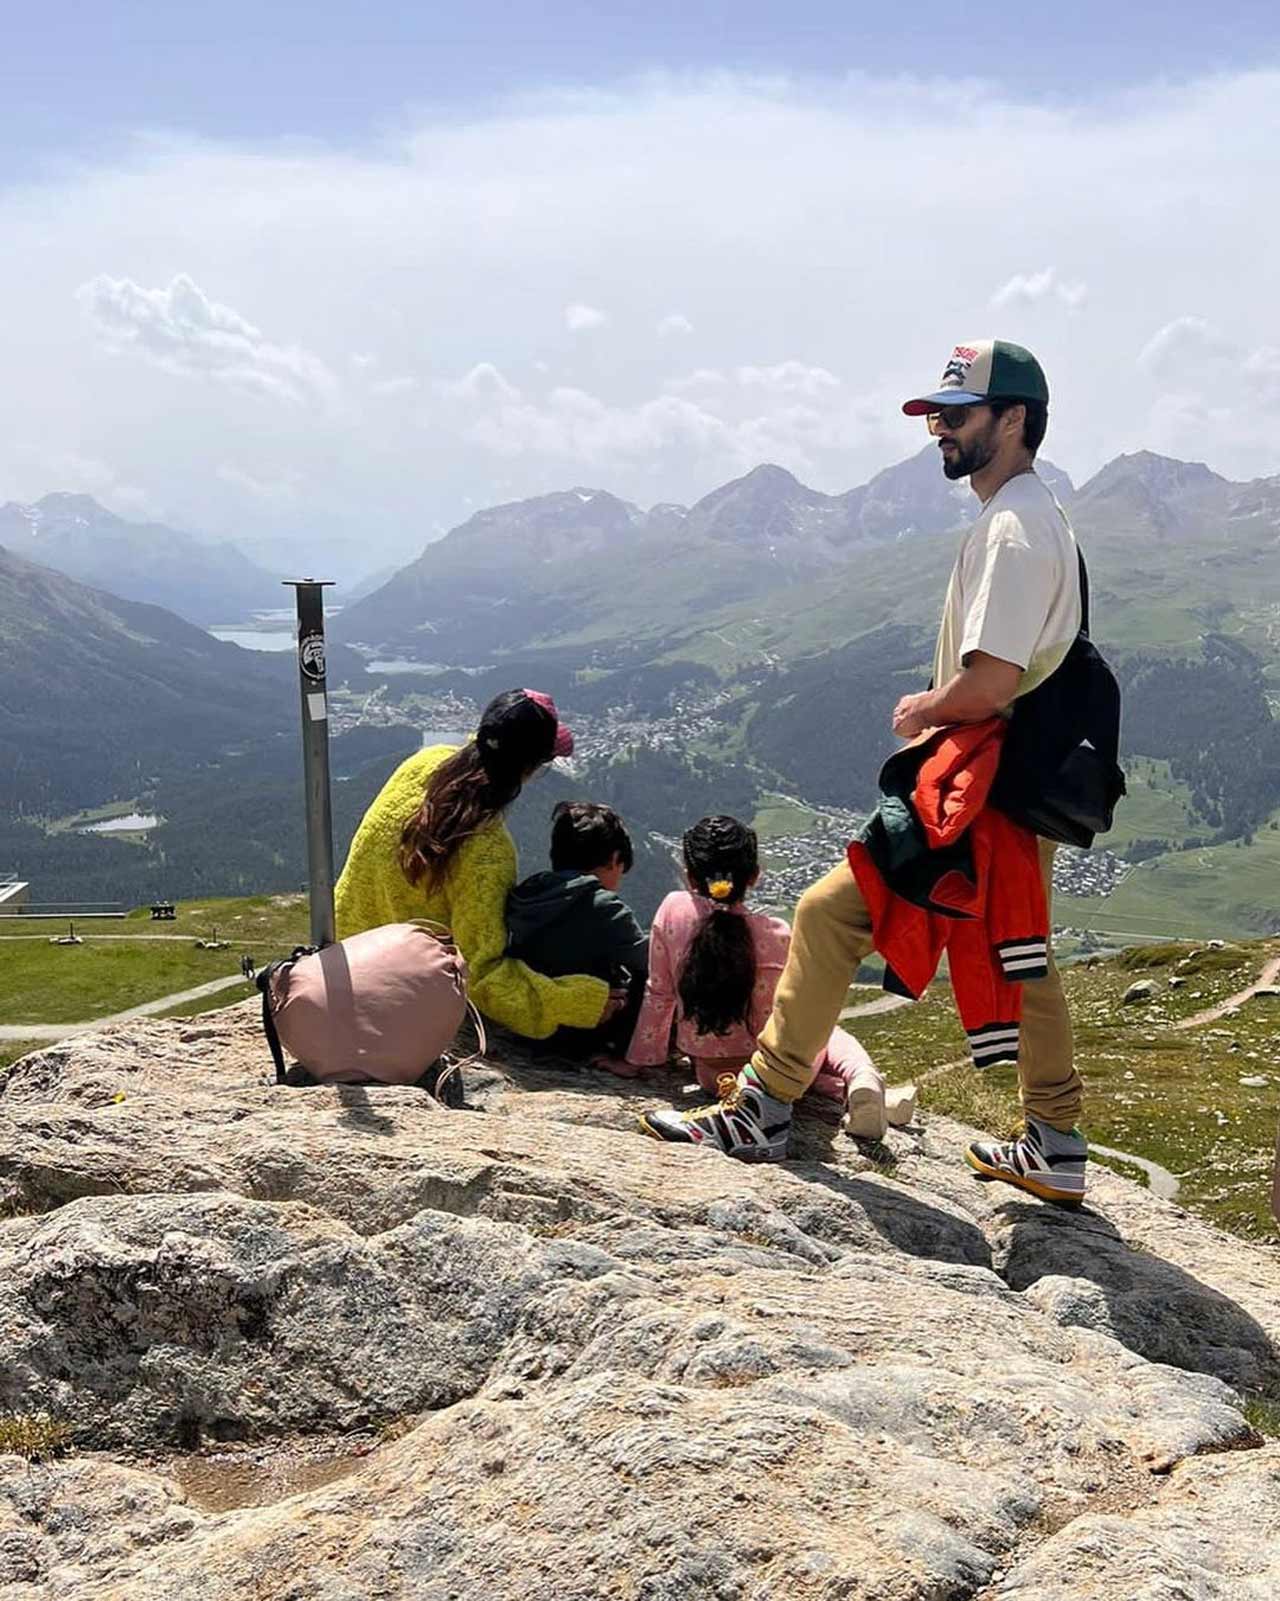 Shahid shared a serene picture of the beautiful destination of Switzerland. His two kids were seated on the lush green grass alongside their mother, while Shahid stood, facing his back to the camera